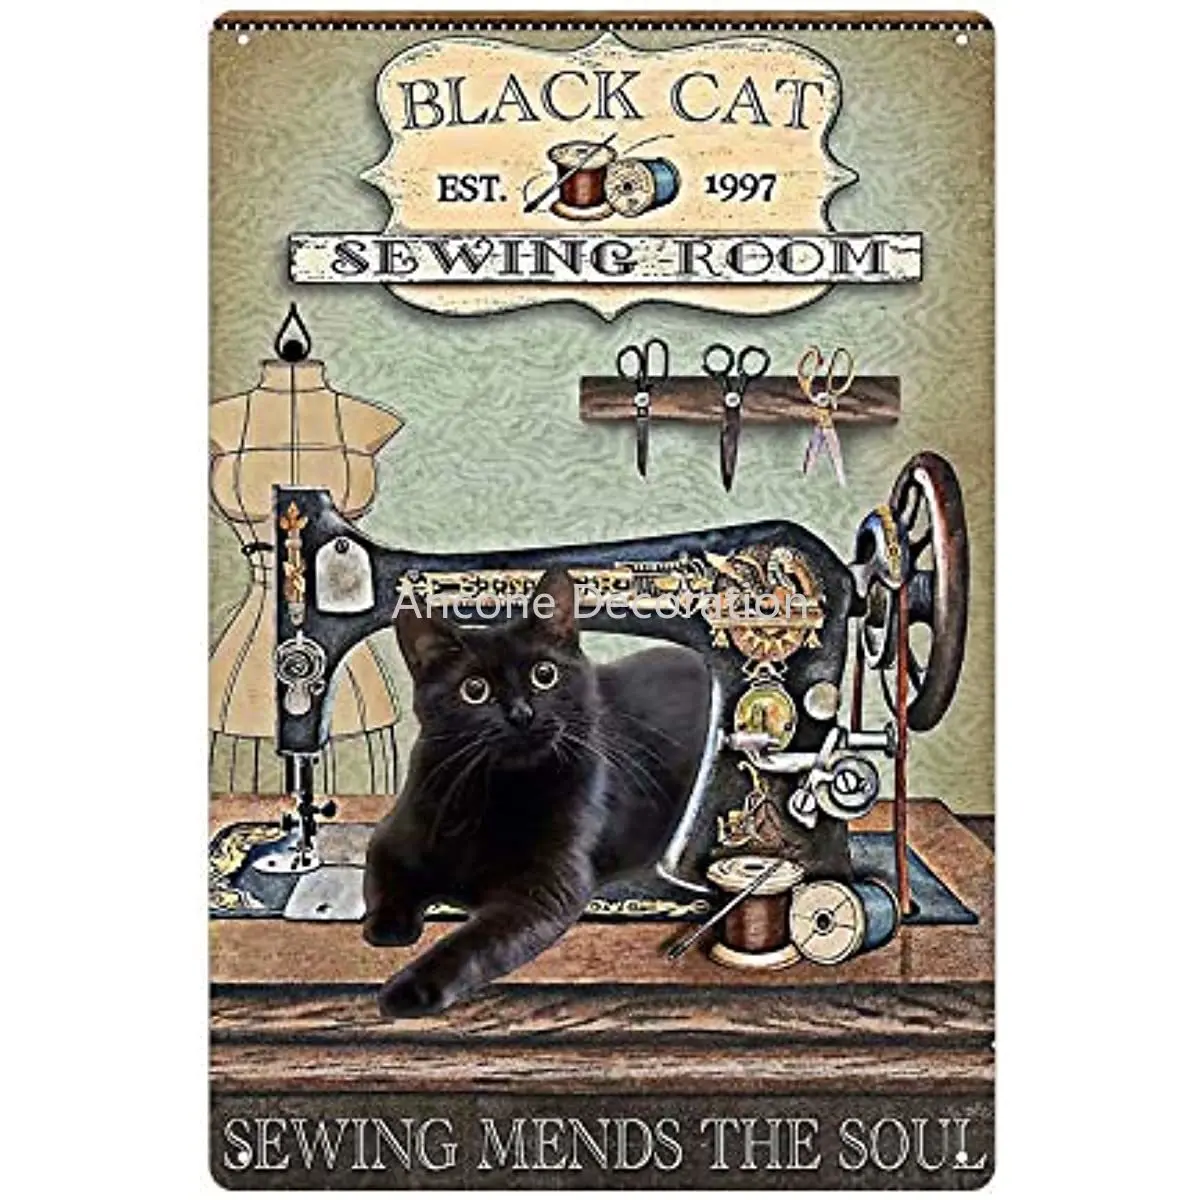 

Black Cat Vintage Metal Tin Sign,Sewing Room Retro Wall Plaque Poster Cafe Bar Pub Beer Club Wall Home Decor 8x12 inch